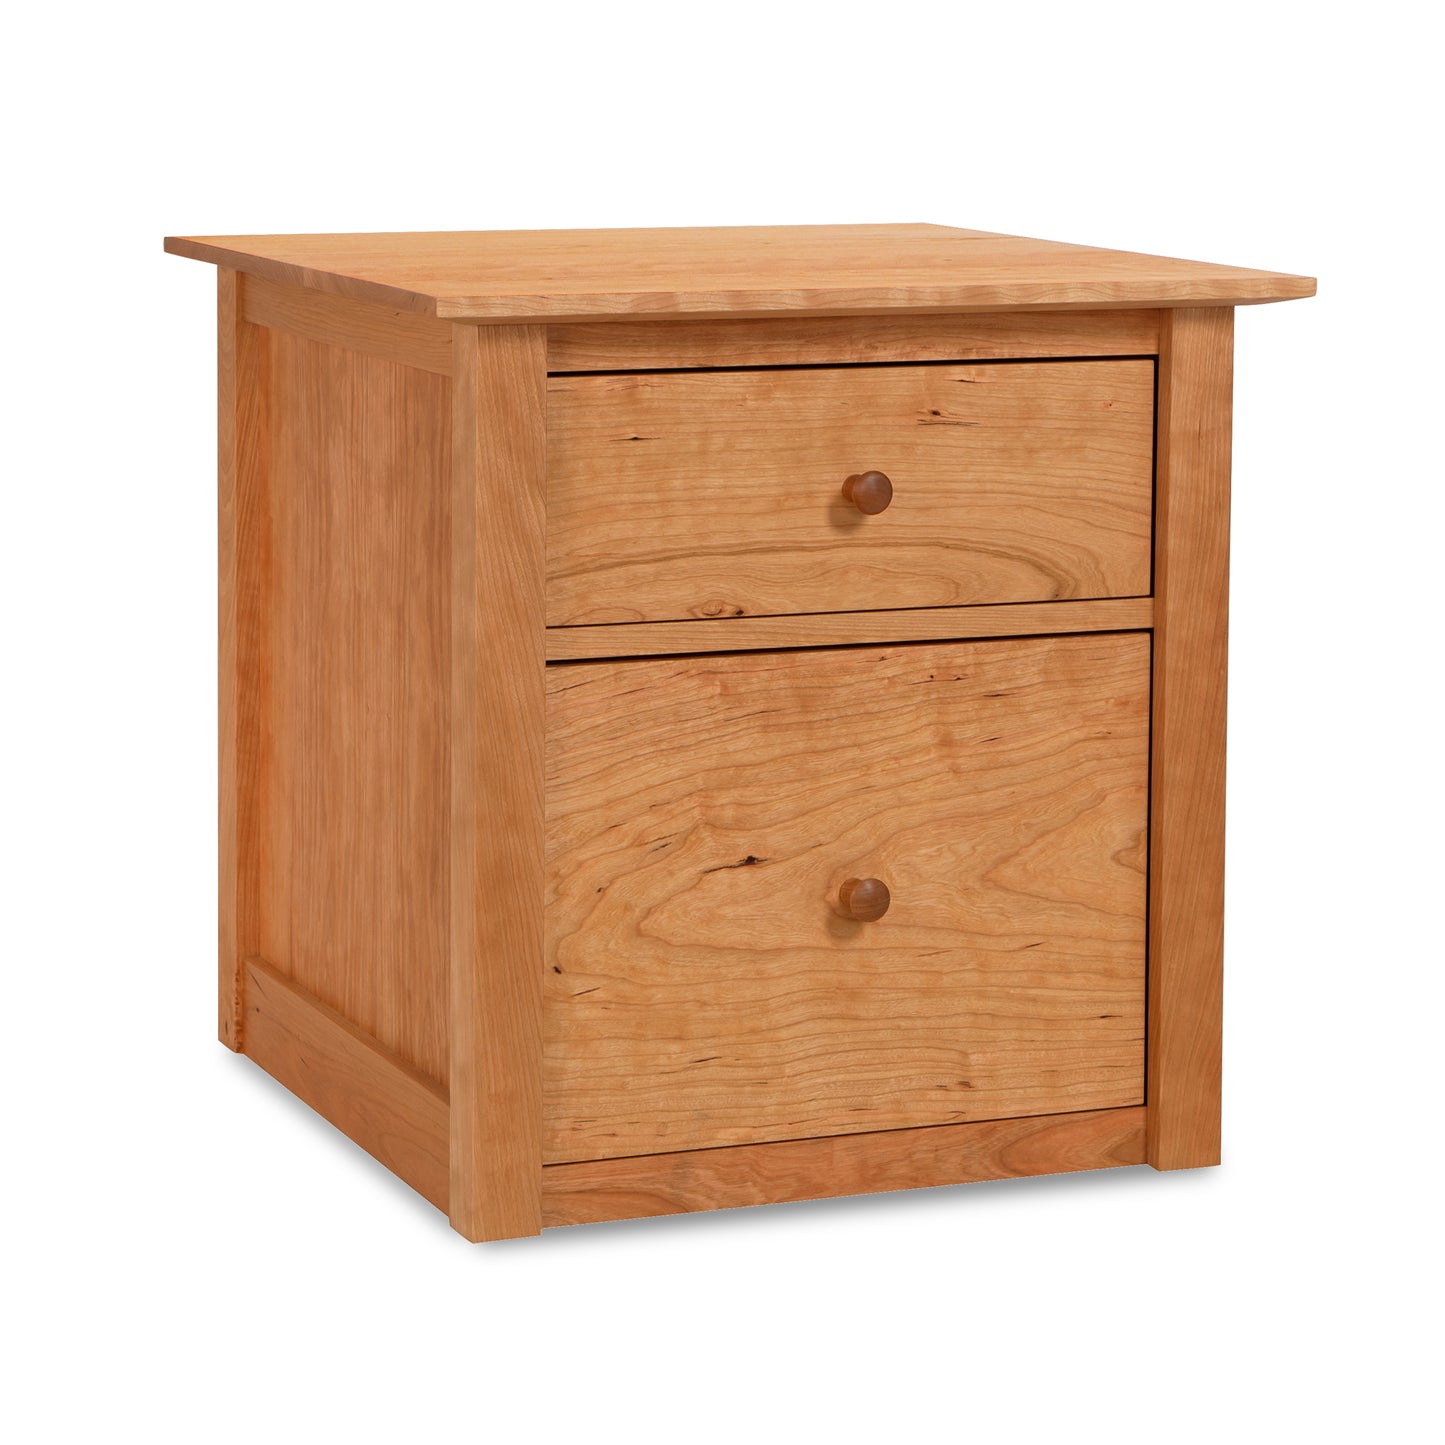 A wooden two-drawer Maple Corner Woodworks American Shaker file cabinet isolated on a white background.